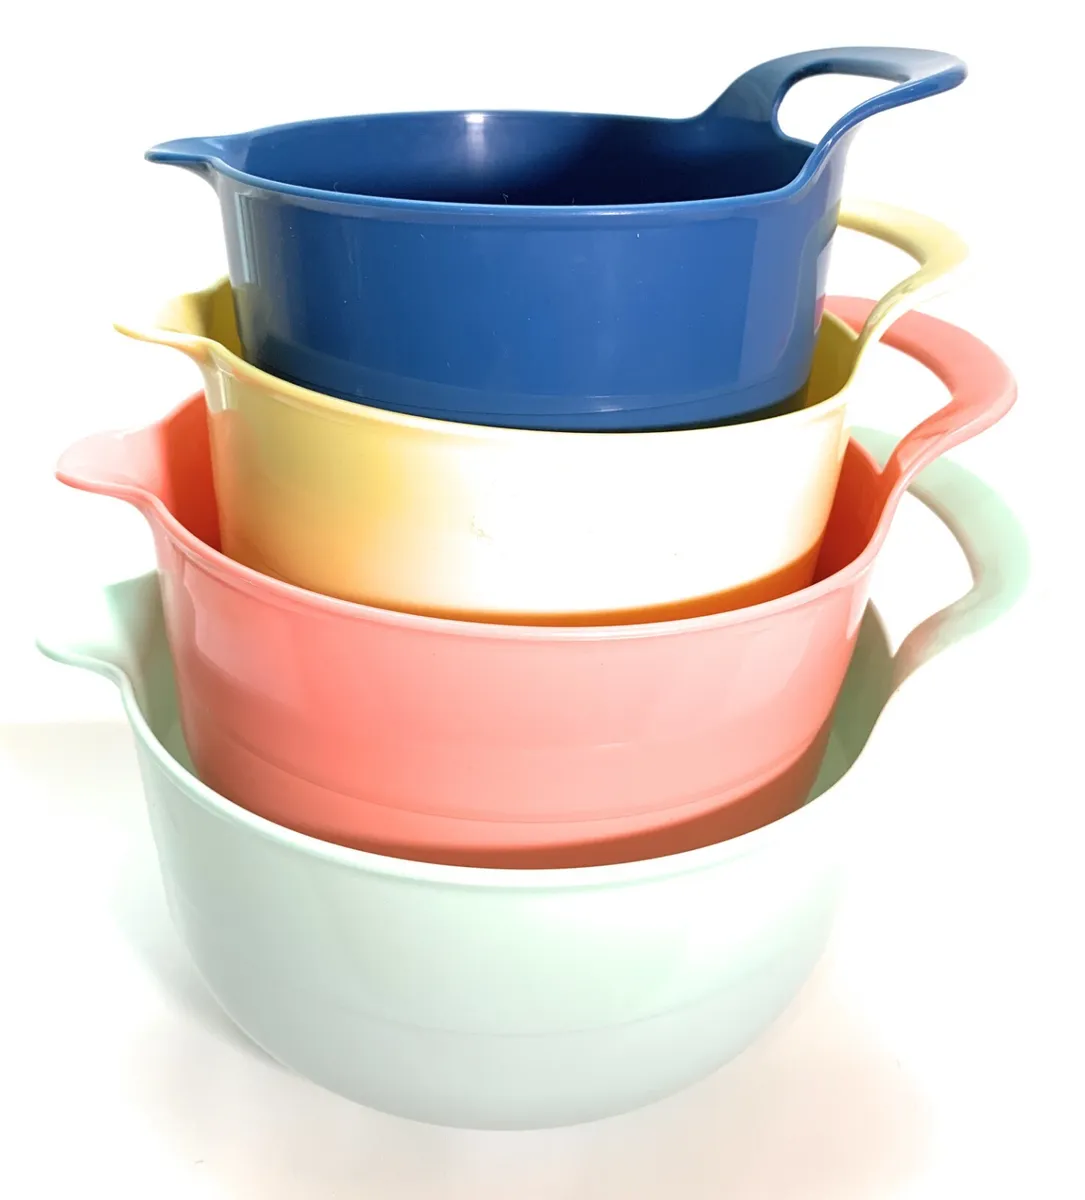  COOK WITH COLOR Mixing Bowls - 4 Piece Nesting Plastic